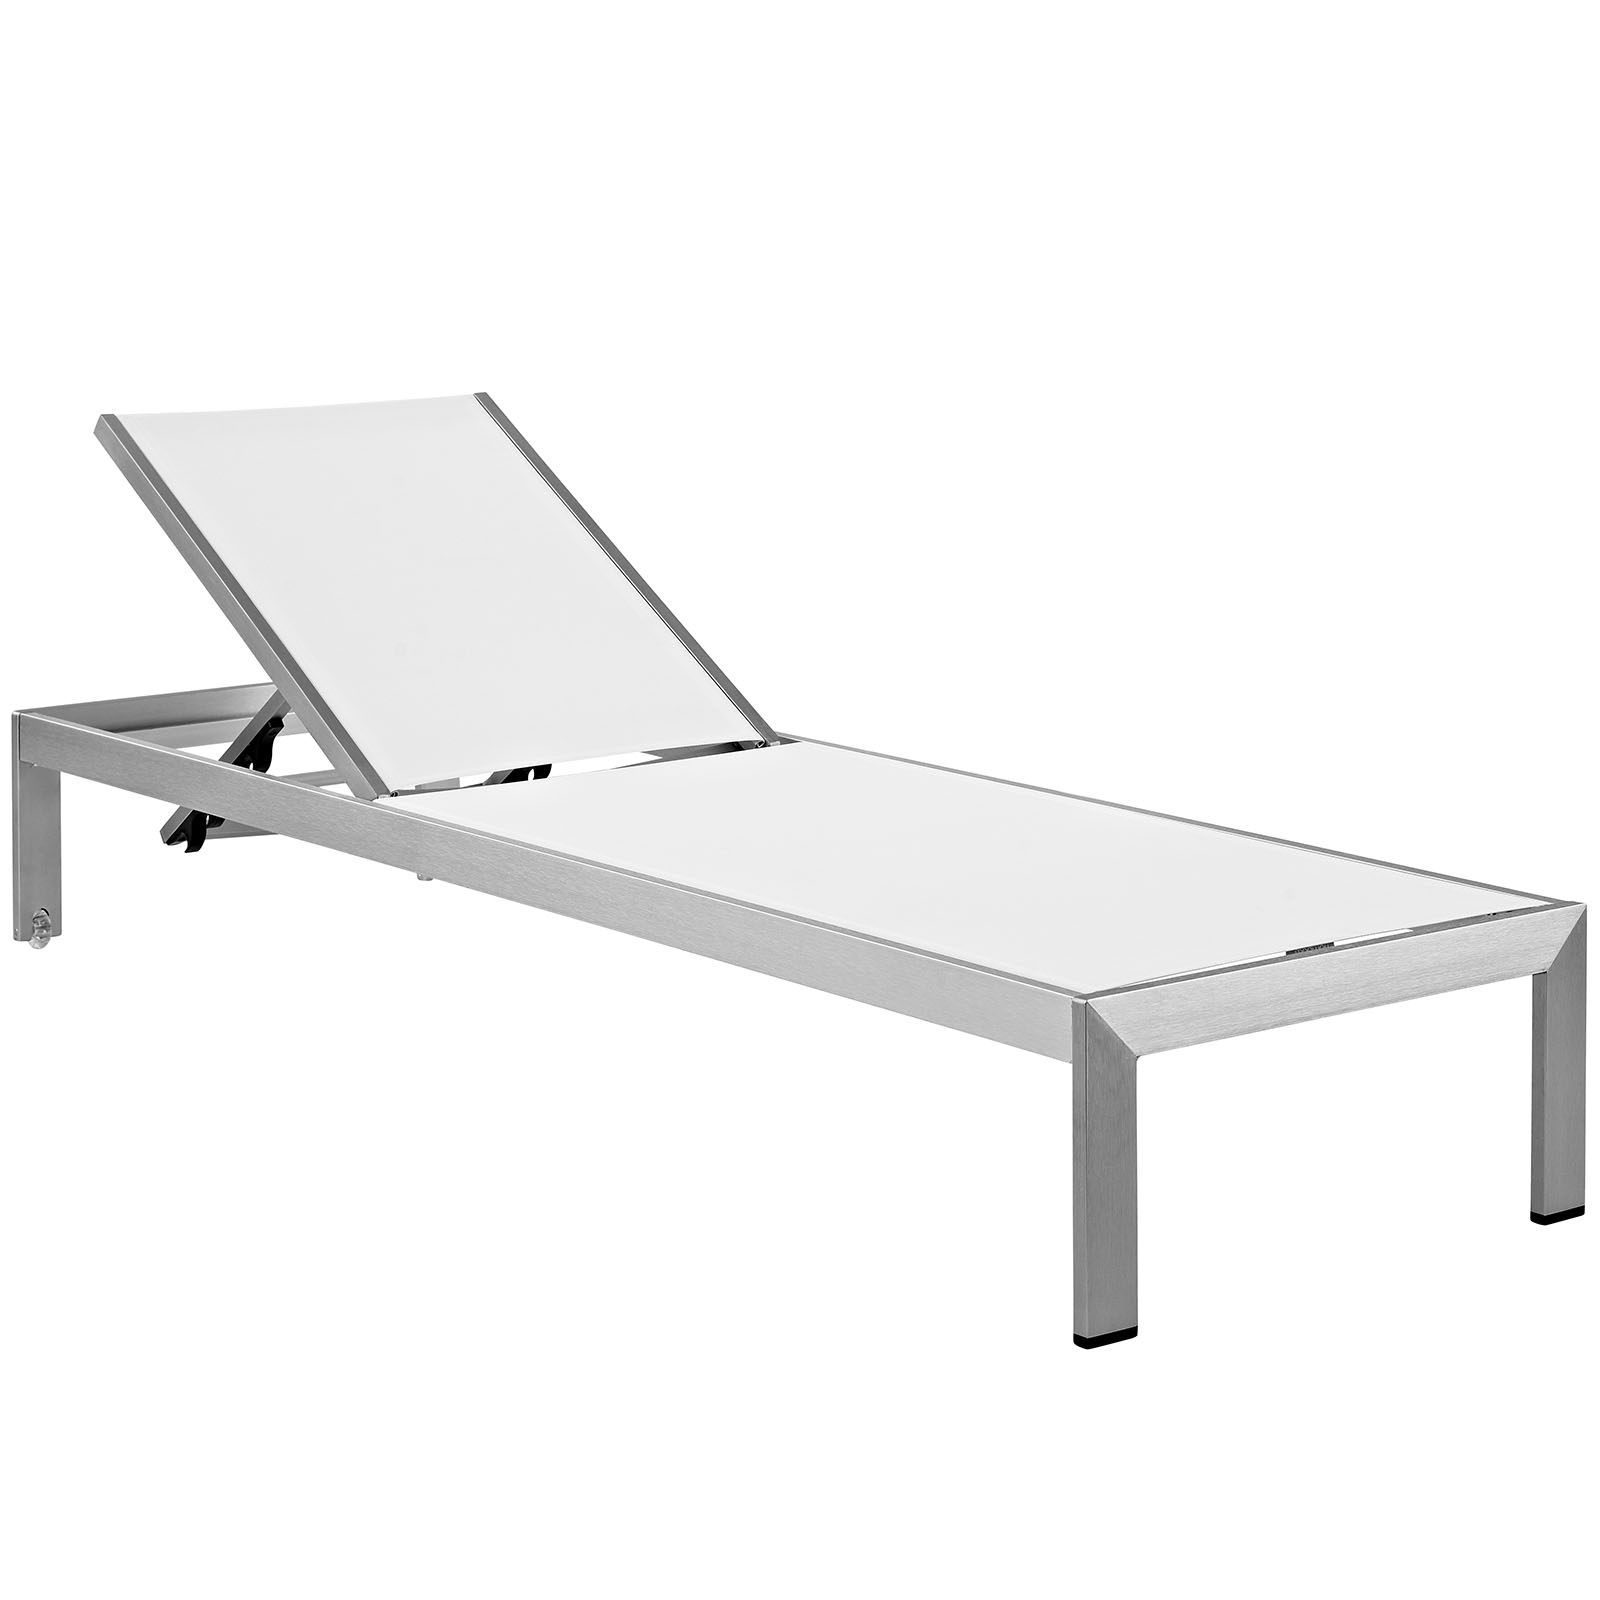 Modern Contemporary Urban Design Outdoor Patio Balcony Chaise Lounge Chair and Side Table set, White, Aluminum - image 3 of 7